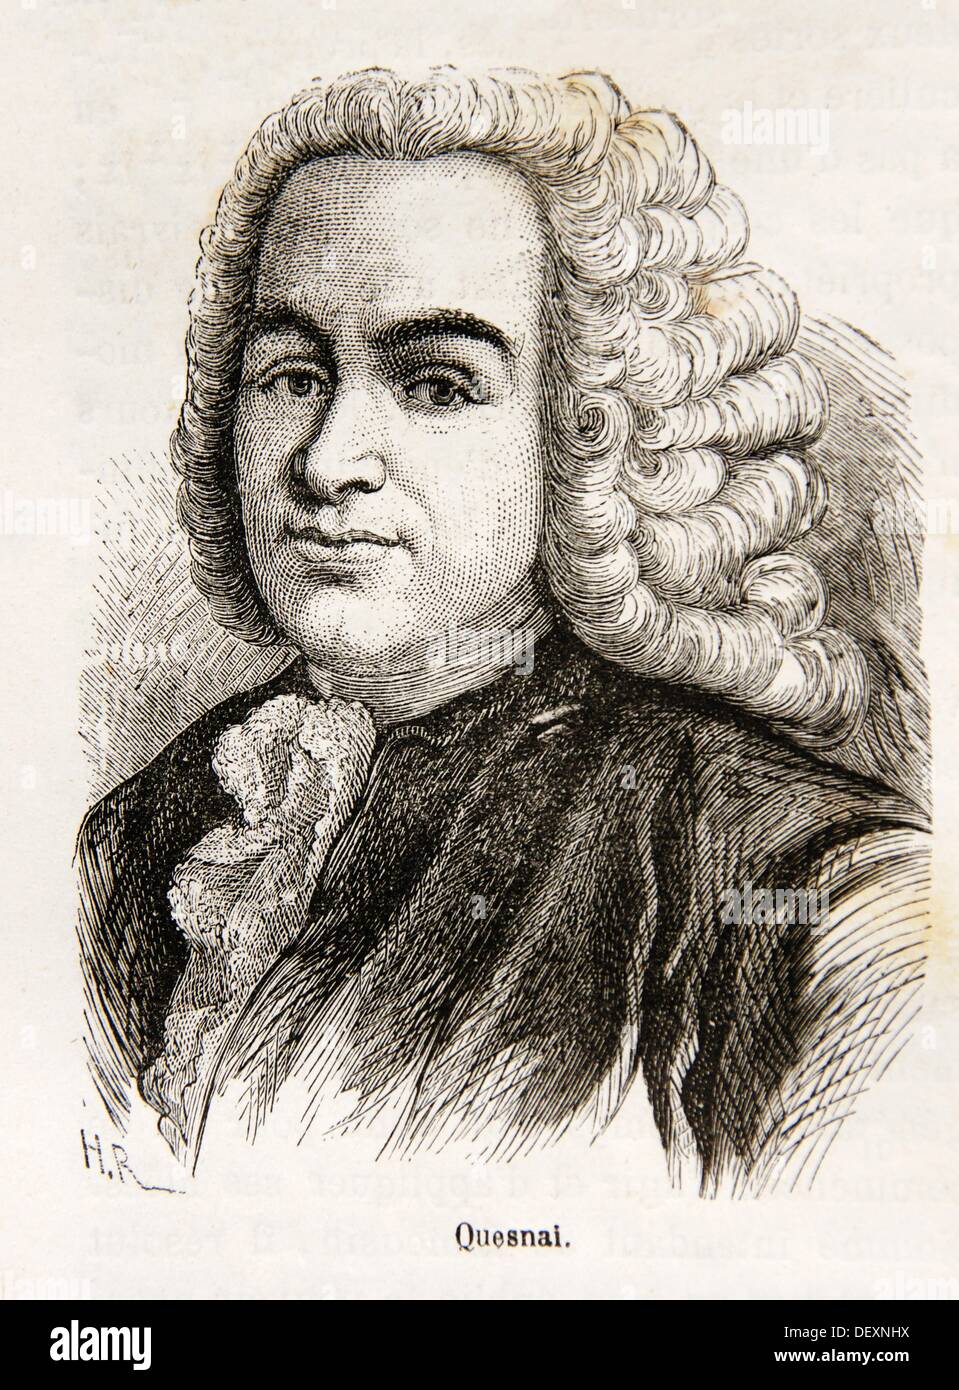 François Quesnay June 4, 1694 - December 16, 1774 was a French economist of the Physiocratic school  He is known for publishing Stock Photo